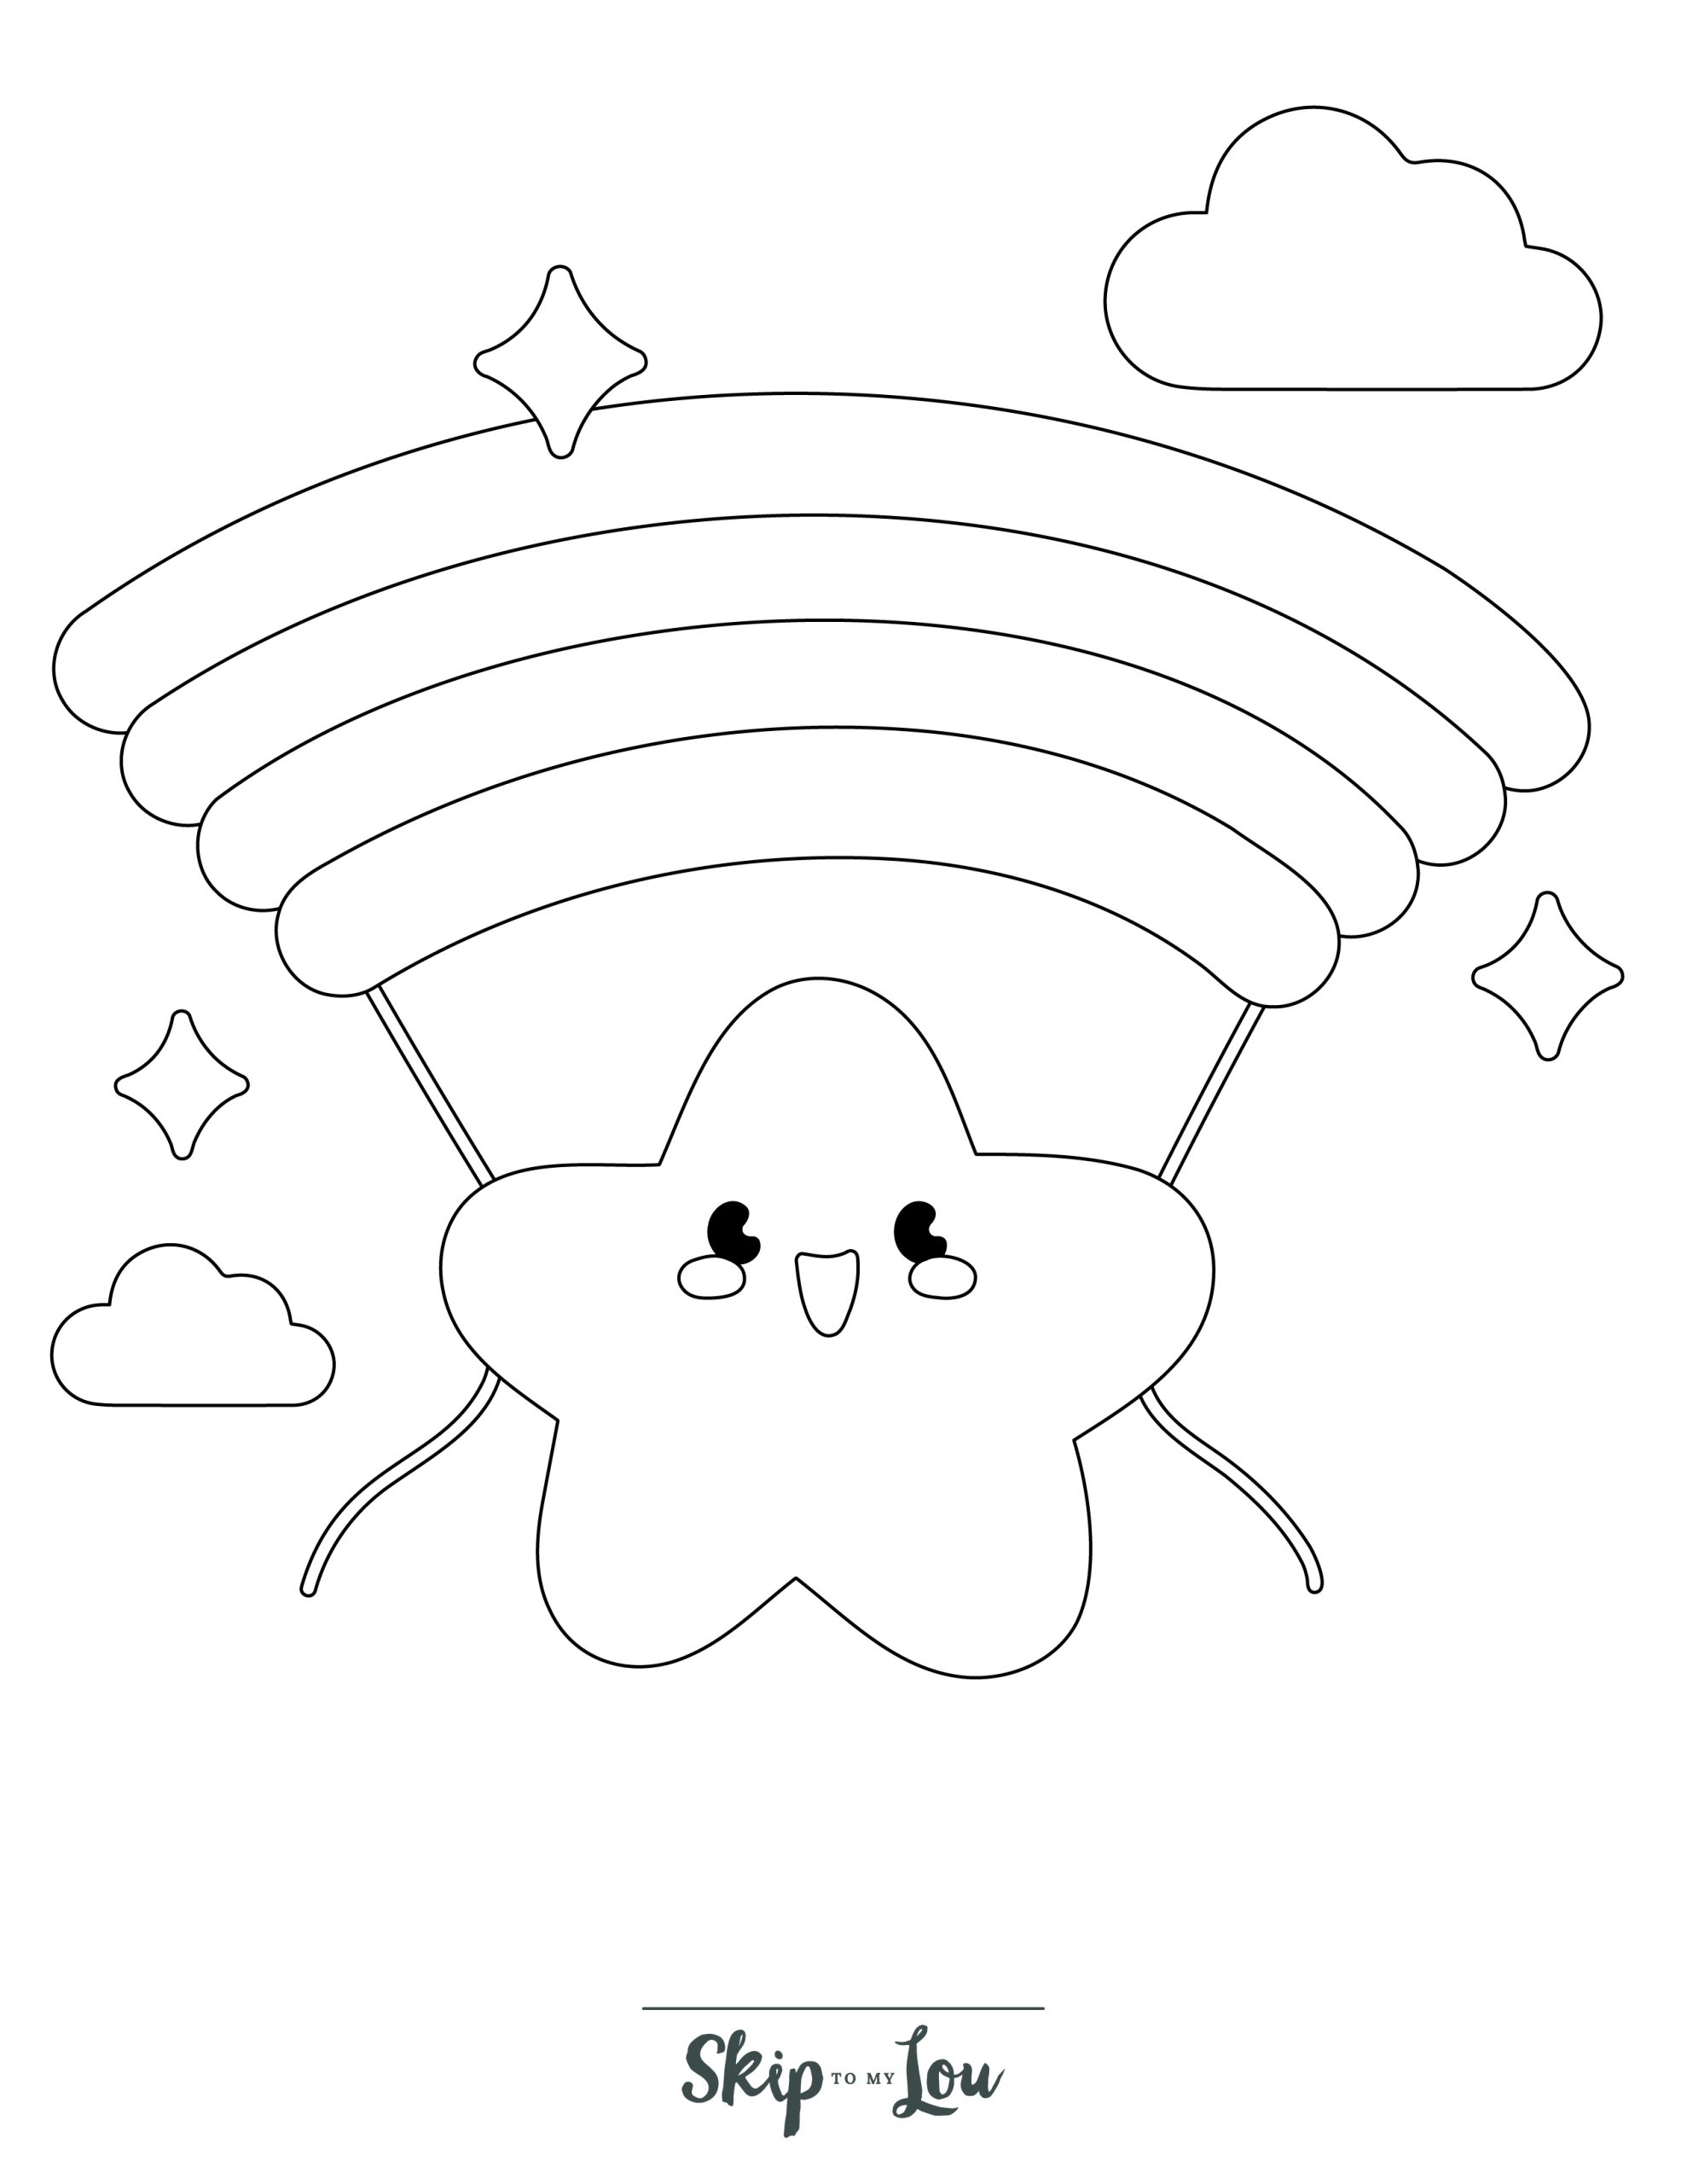 Star Coloring Page 10 - Line drawing of a happy star with a rainbow